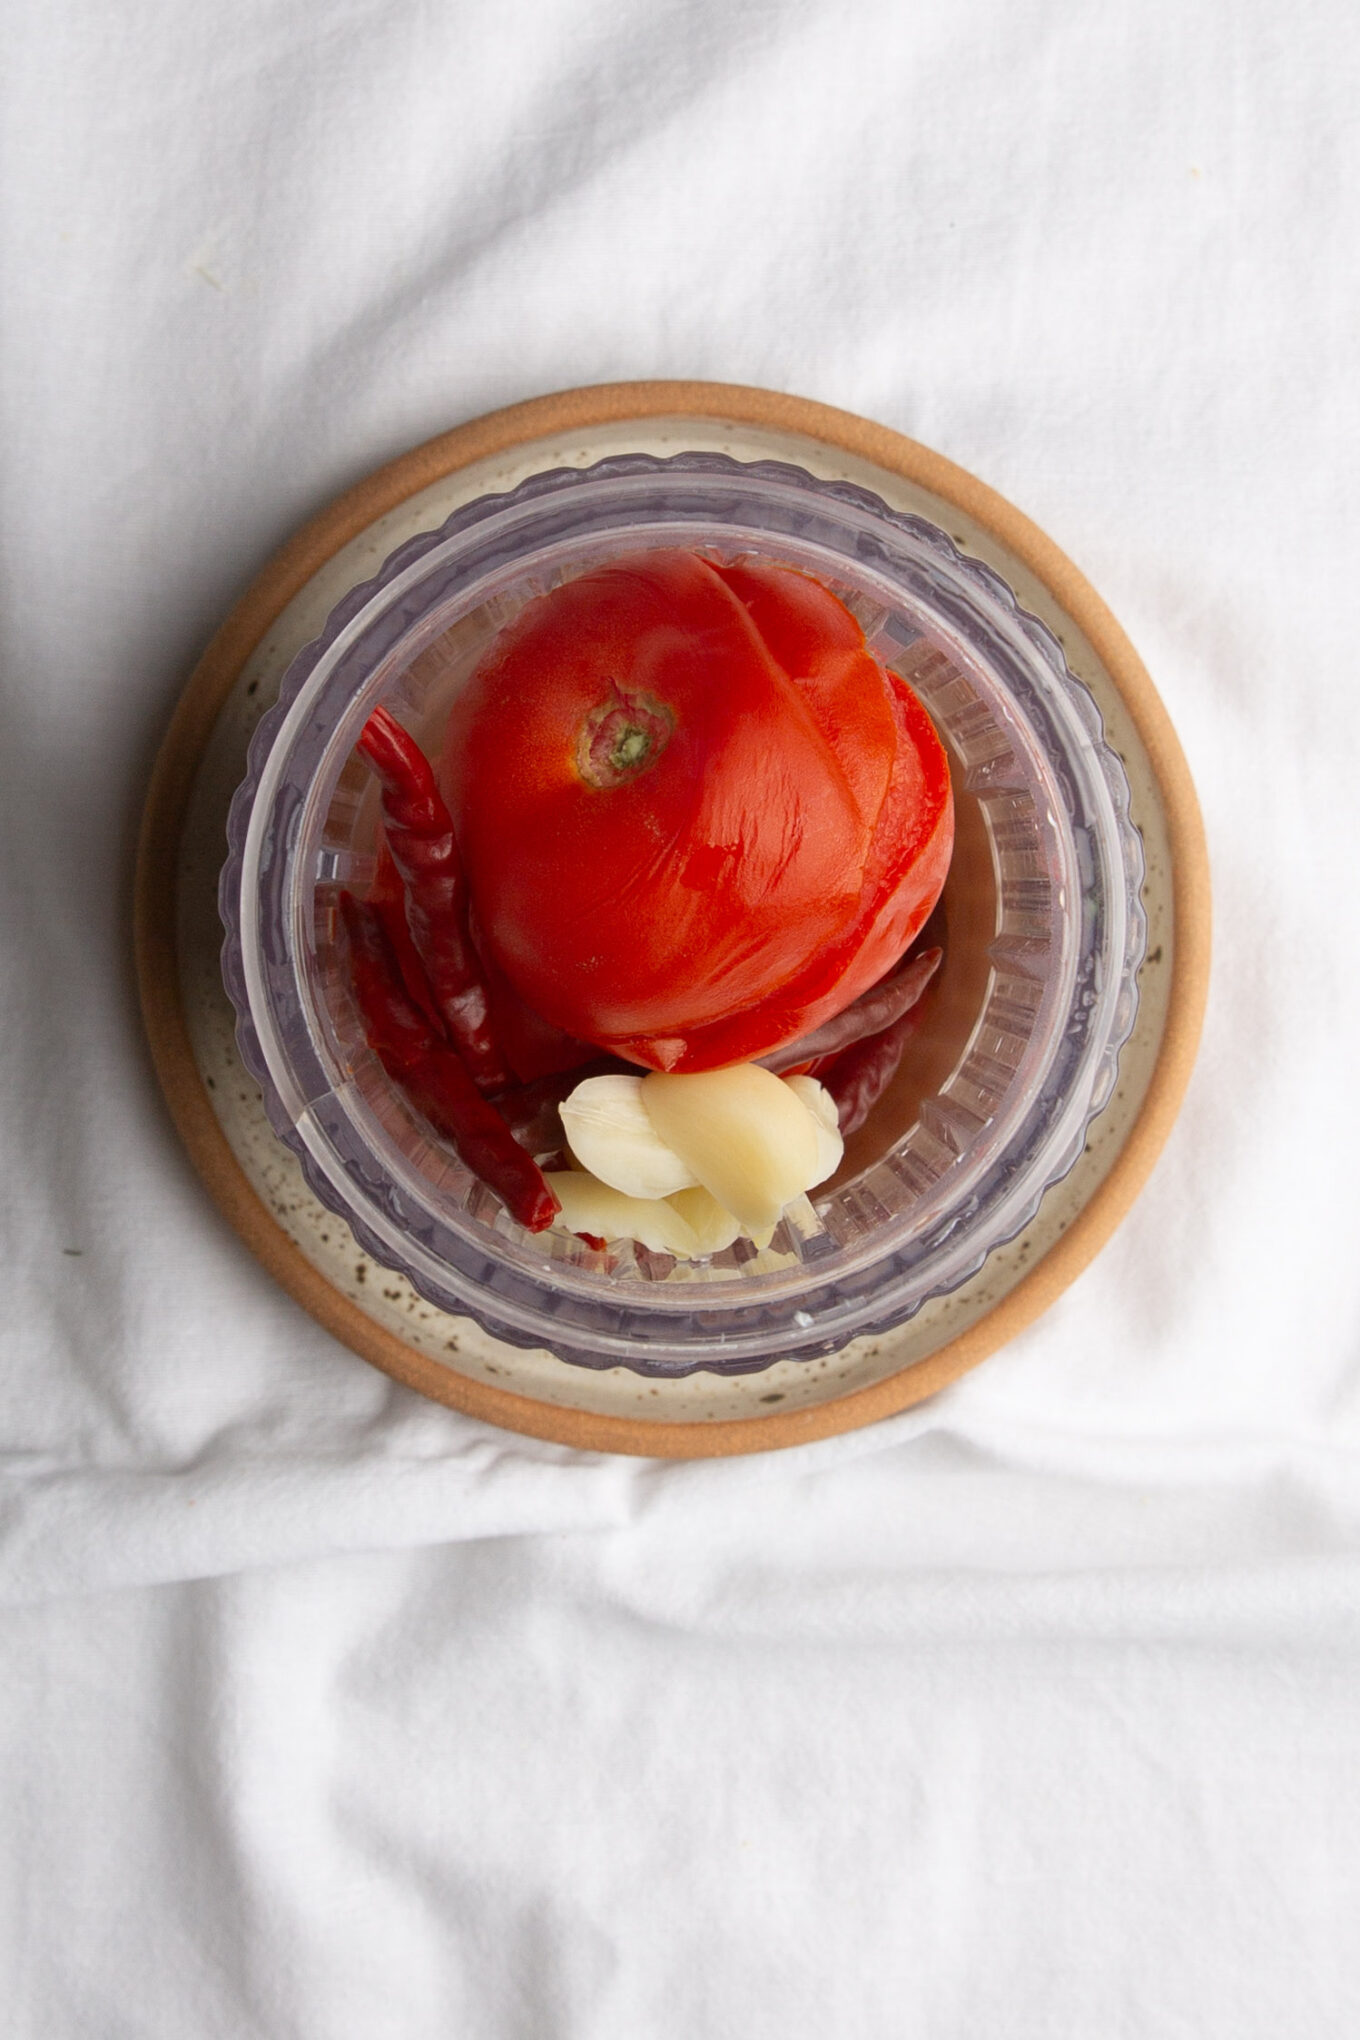 There is a tomato on a plate.